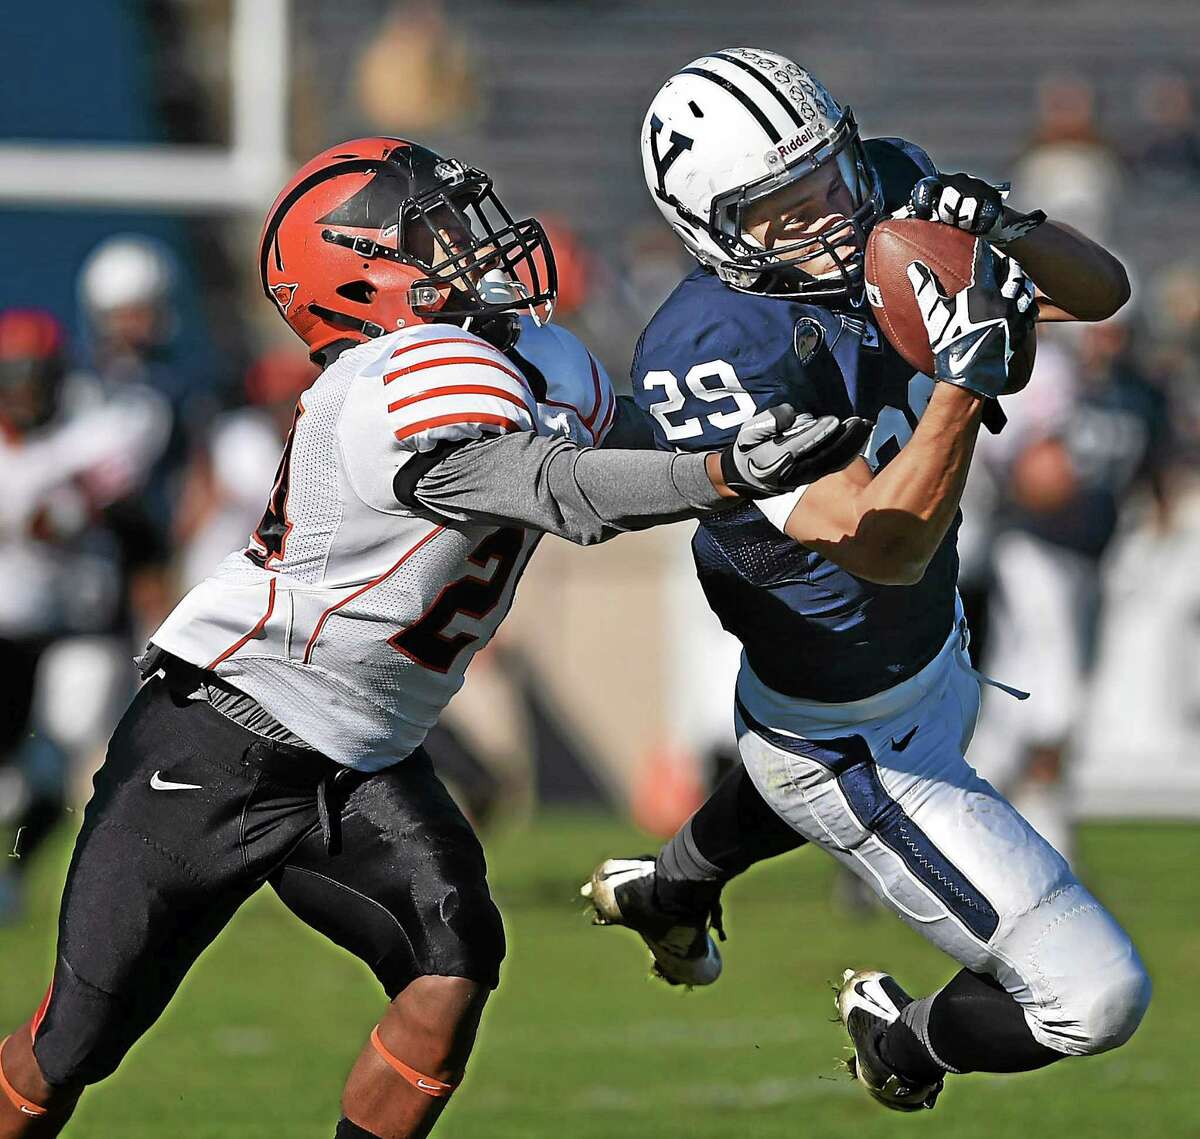 Yale’s Grant Wallace hauls in a pass while Princeton’s John Hill defends during the Bulldogs’ 44-30 win on Saturday afternoon at Yale Bowl in New Haven.